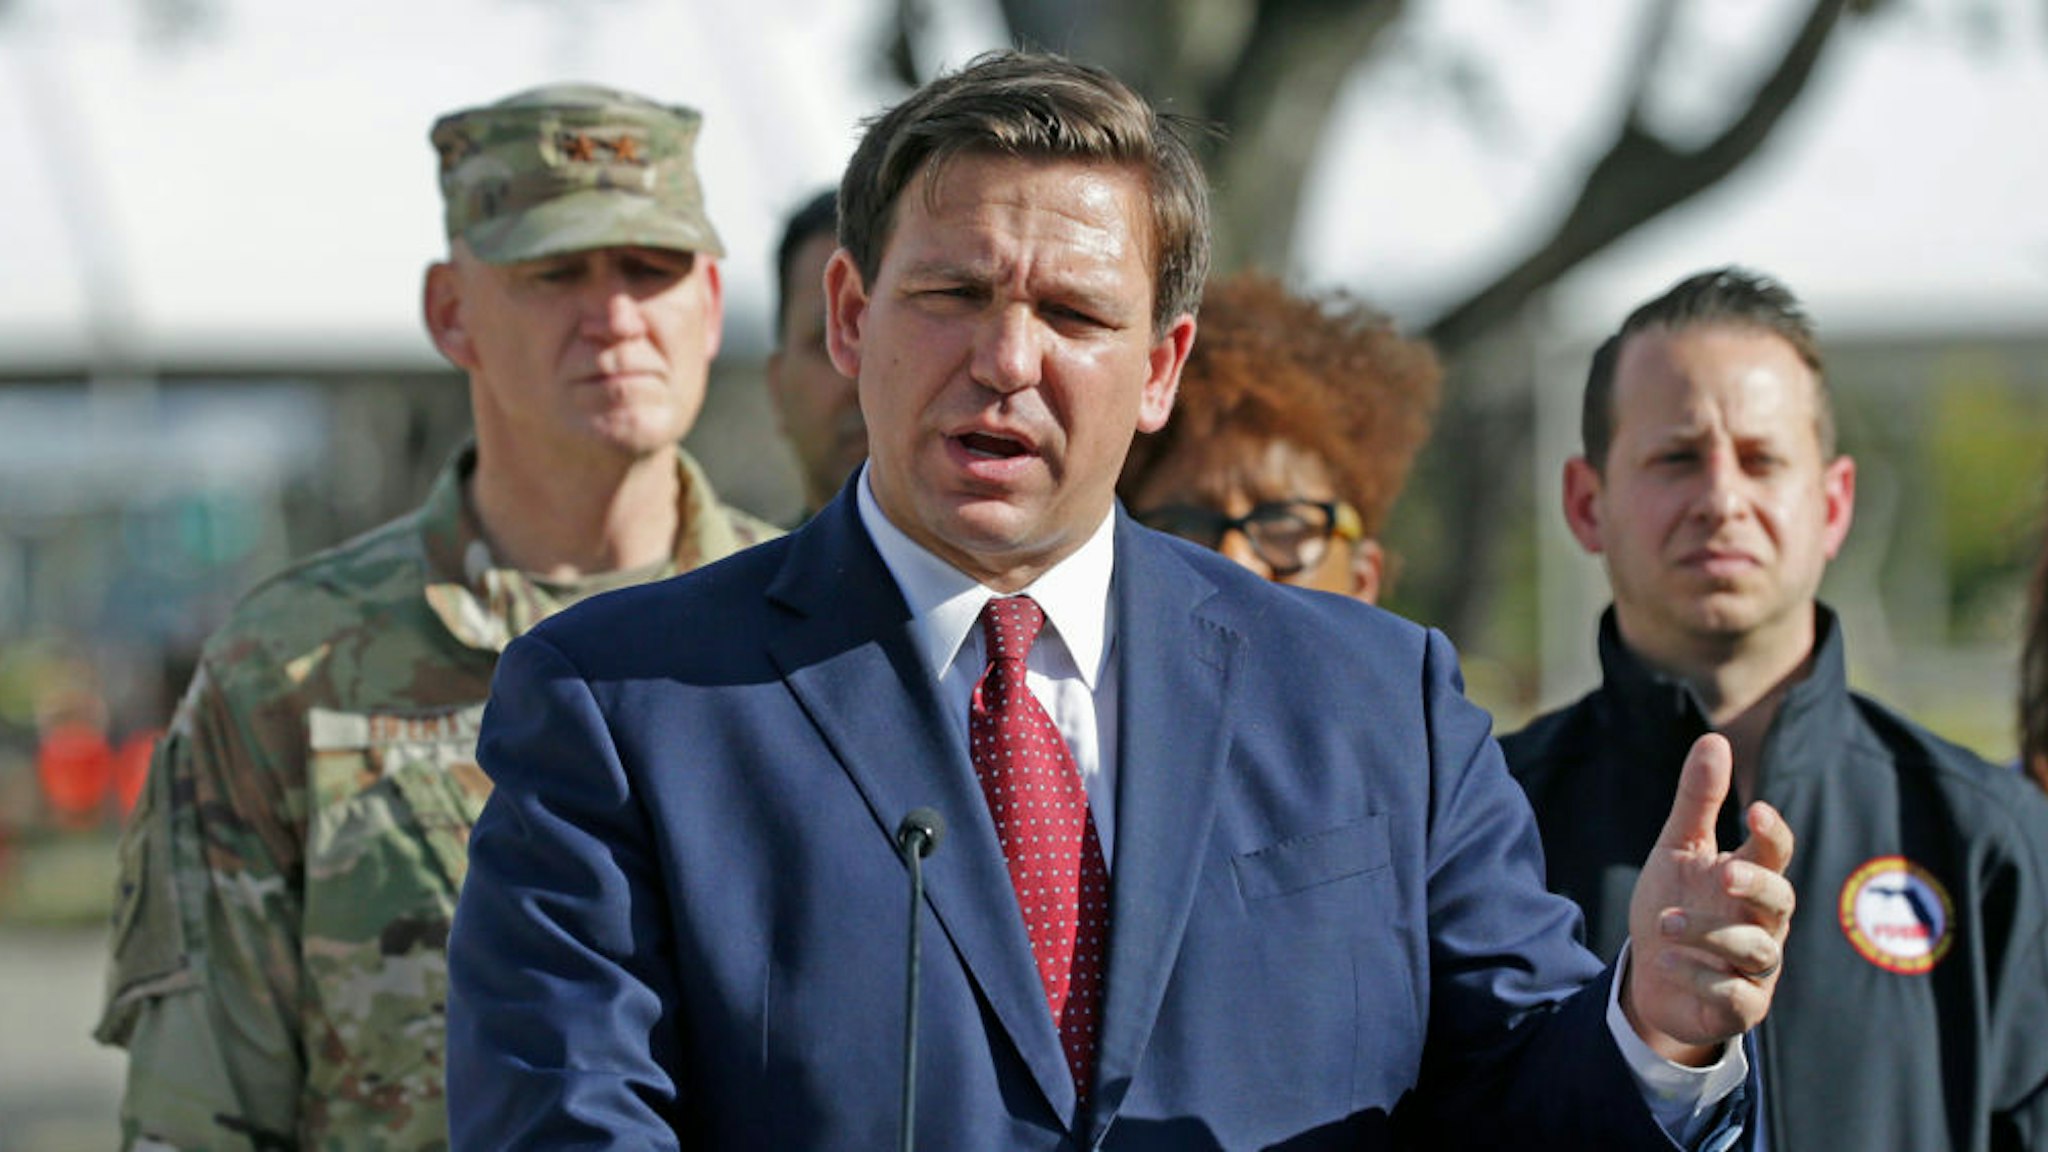 Florida Gov. Ron DeSantis talks to the media during press conference at the Broward County mobile testing at CB Smith Park in Pembroke Pines on Thursday, March 19, 2020. (David Santiago/Miami Herald/TNS)